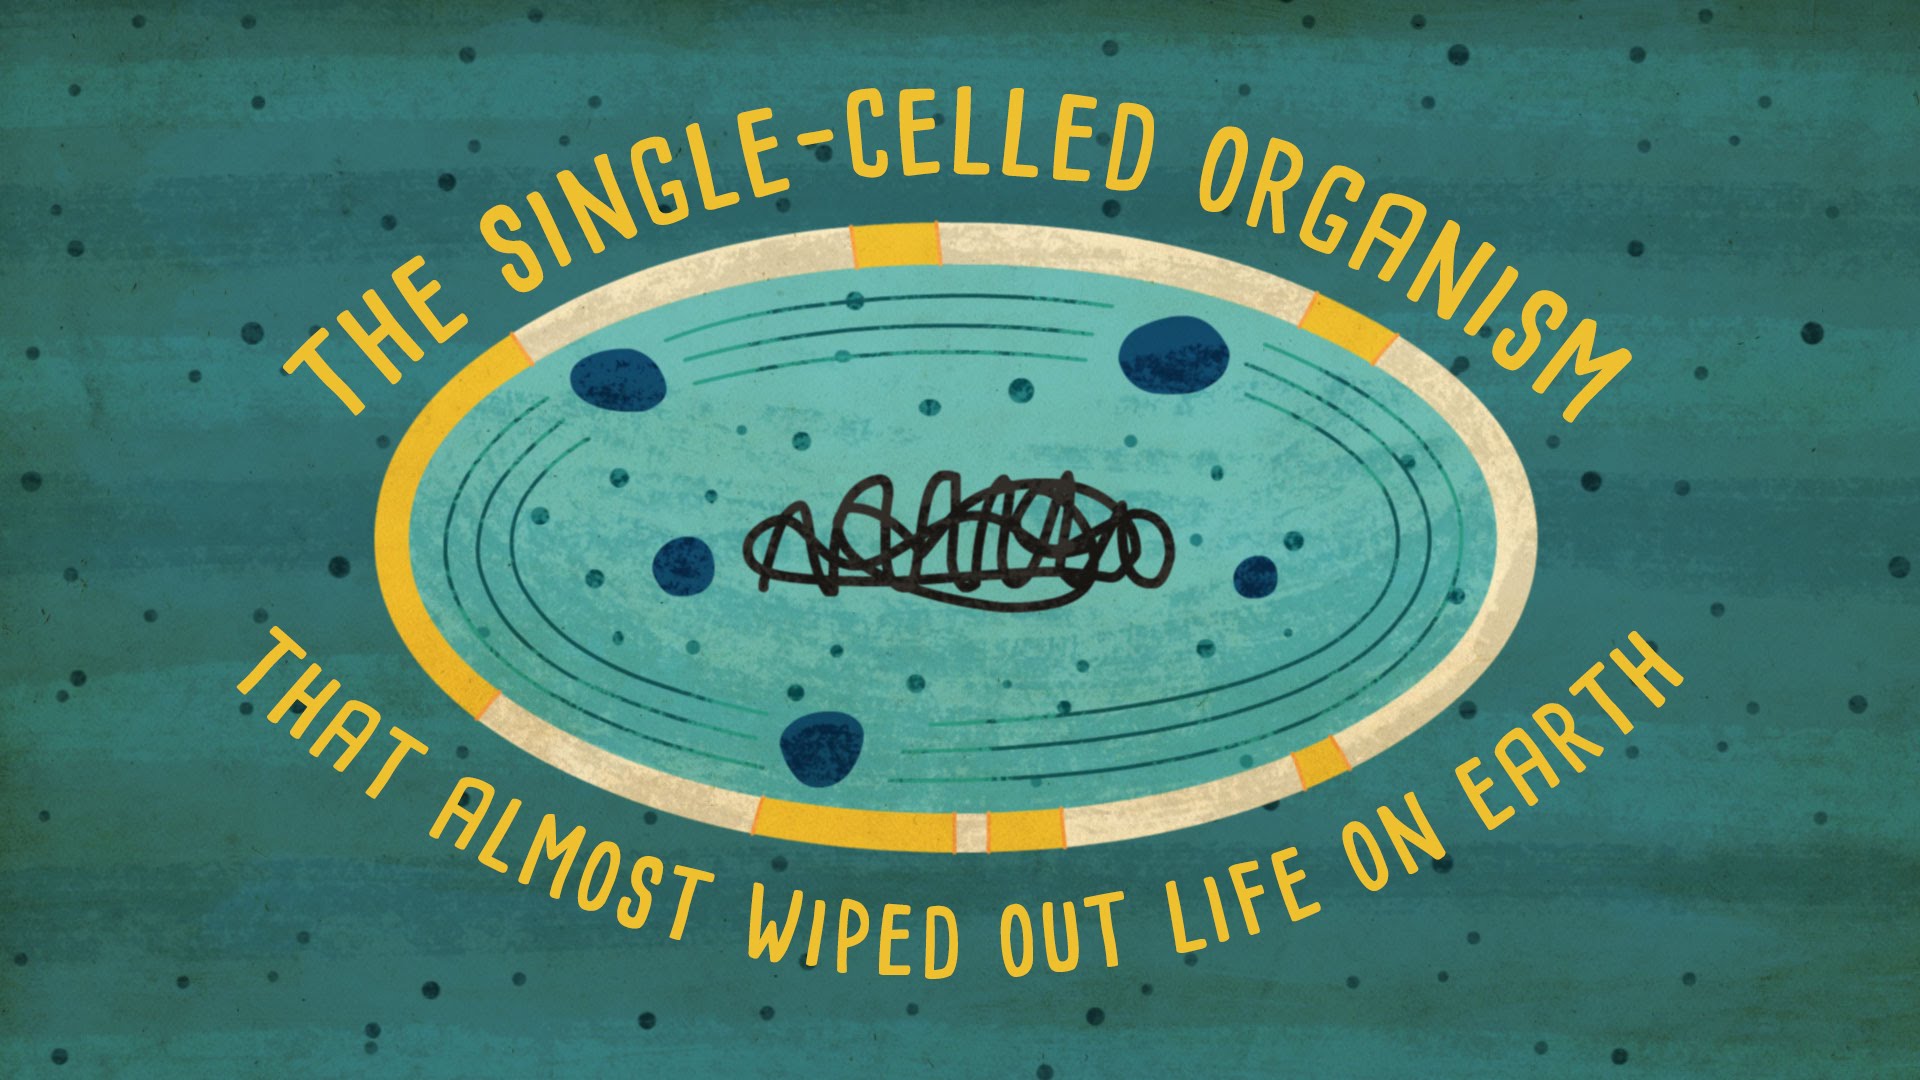 Bite out of life. Life on Earth: reimagined. Wipe out the Planet. Cute Single Celled Organism.